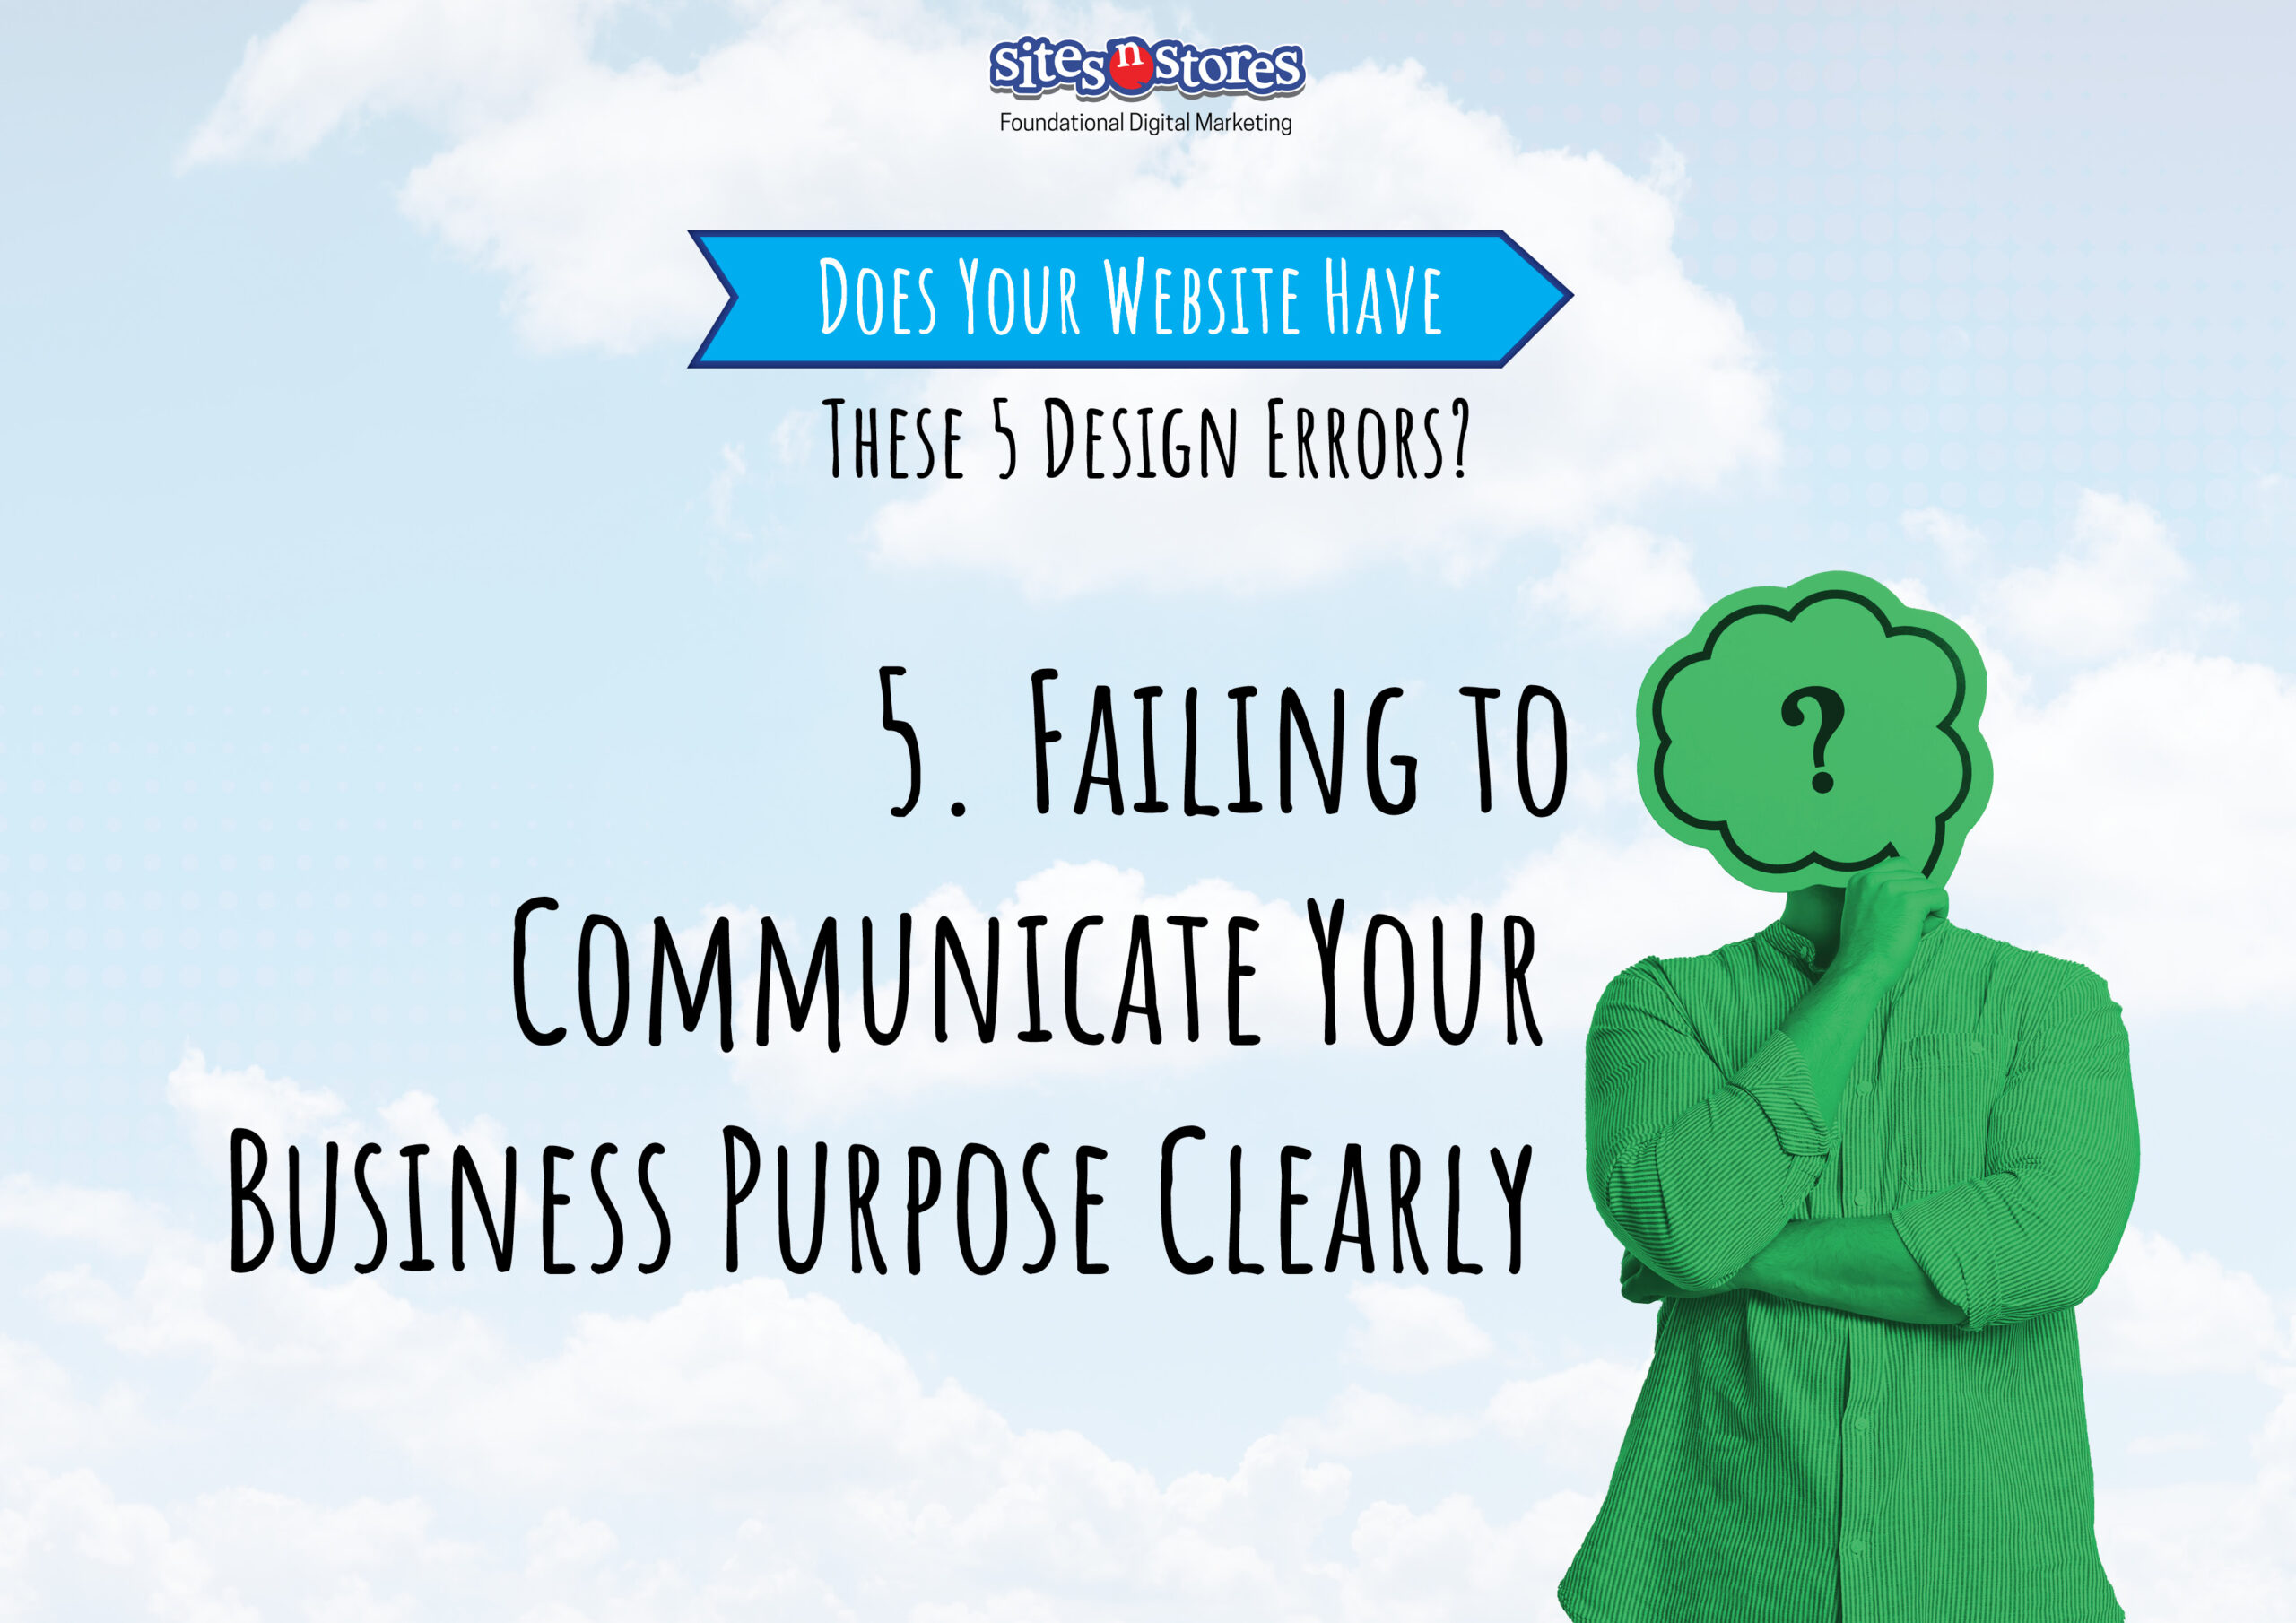 5. Failing to Communicate Your Business Purpose Clearly